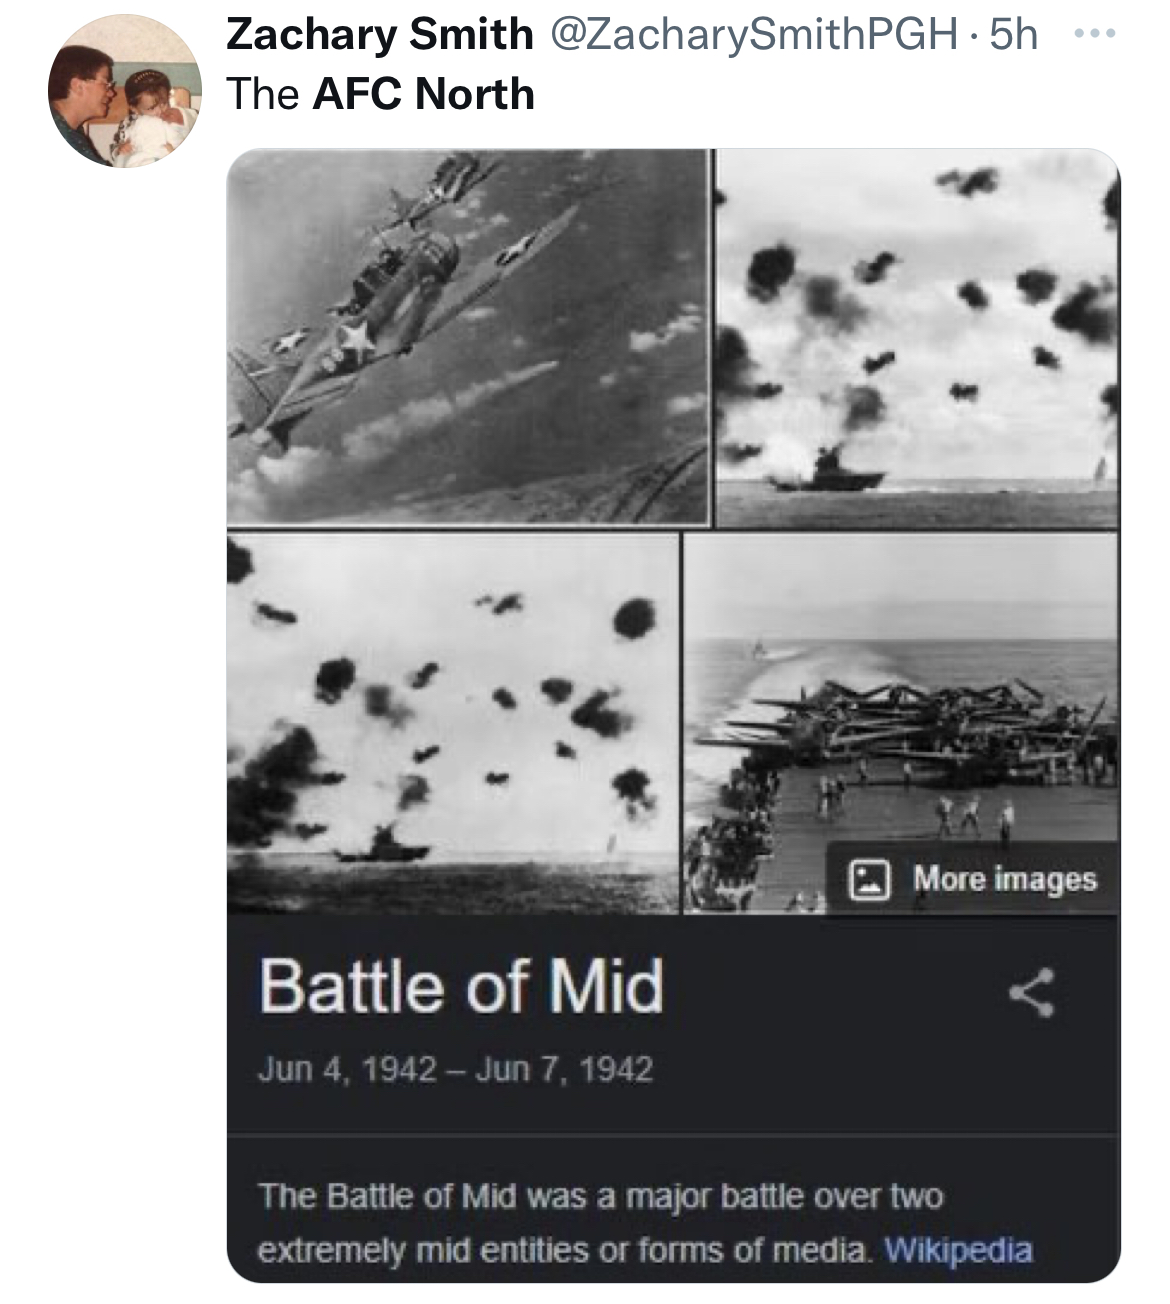 salty and savage nfl memes - monochrome photography - Zachary Smith . 5h The Afc North Battle of Mid www. More images The Battle of Mid was a major battle over two extremely mid entities or forms of media. Wikipedia